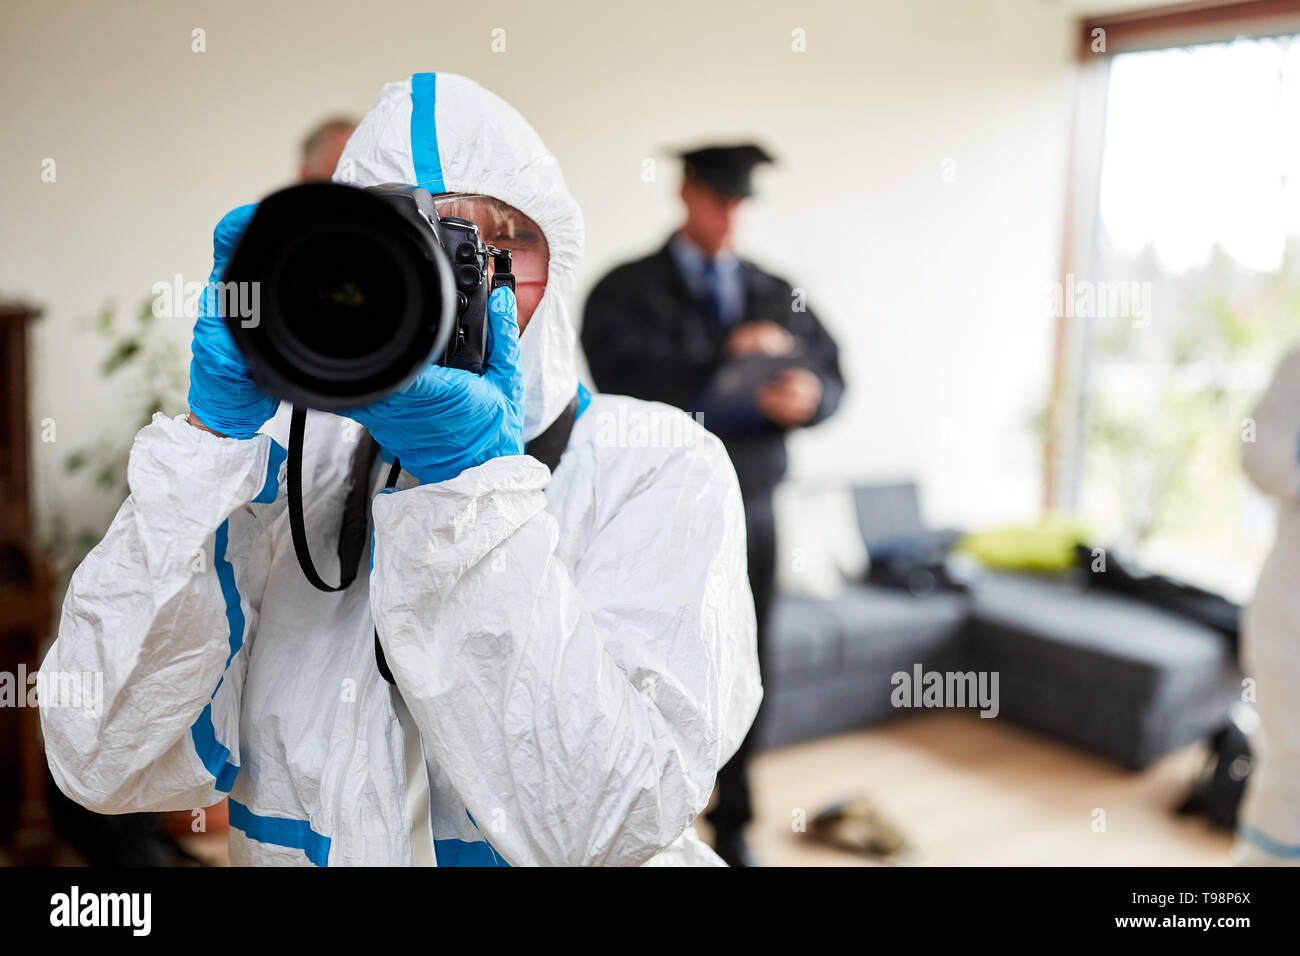 Photographer of the police at the scene after a burglary in the crime scene Stock Photo